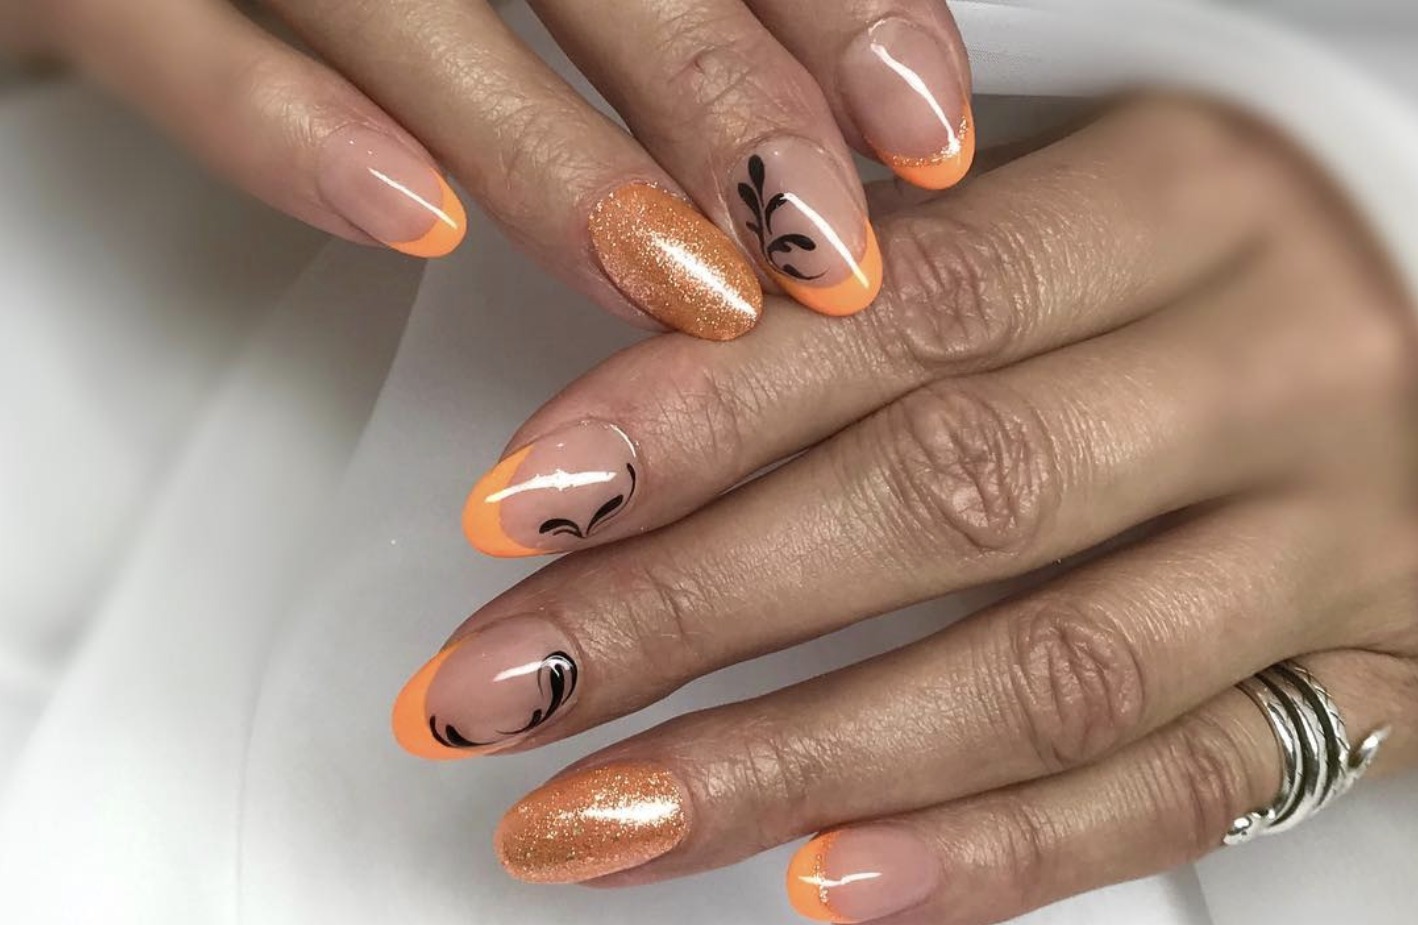 9. Claw Shaped Nail Designs for Halloween - wide 8